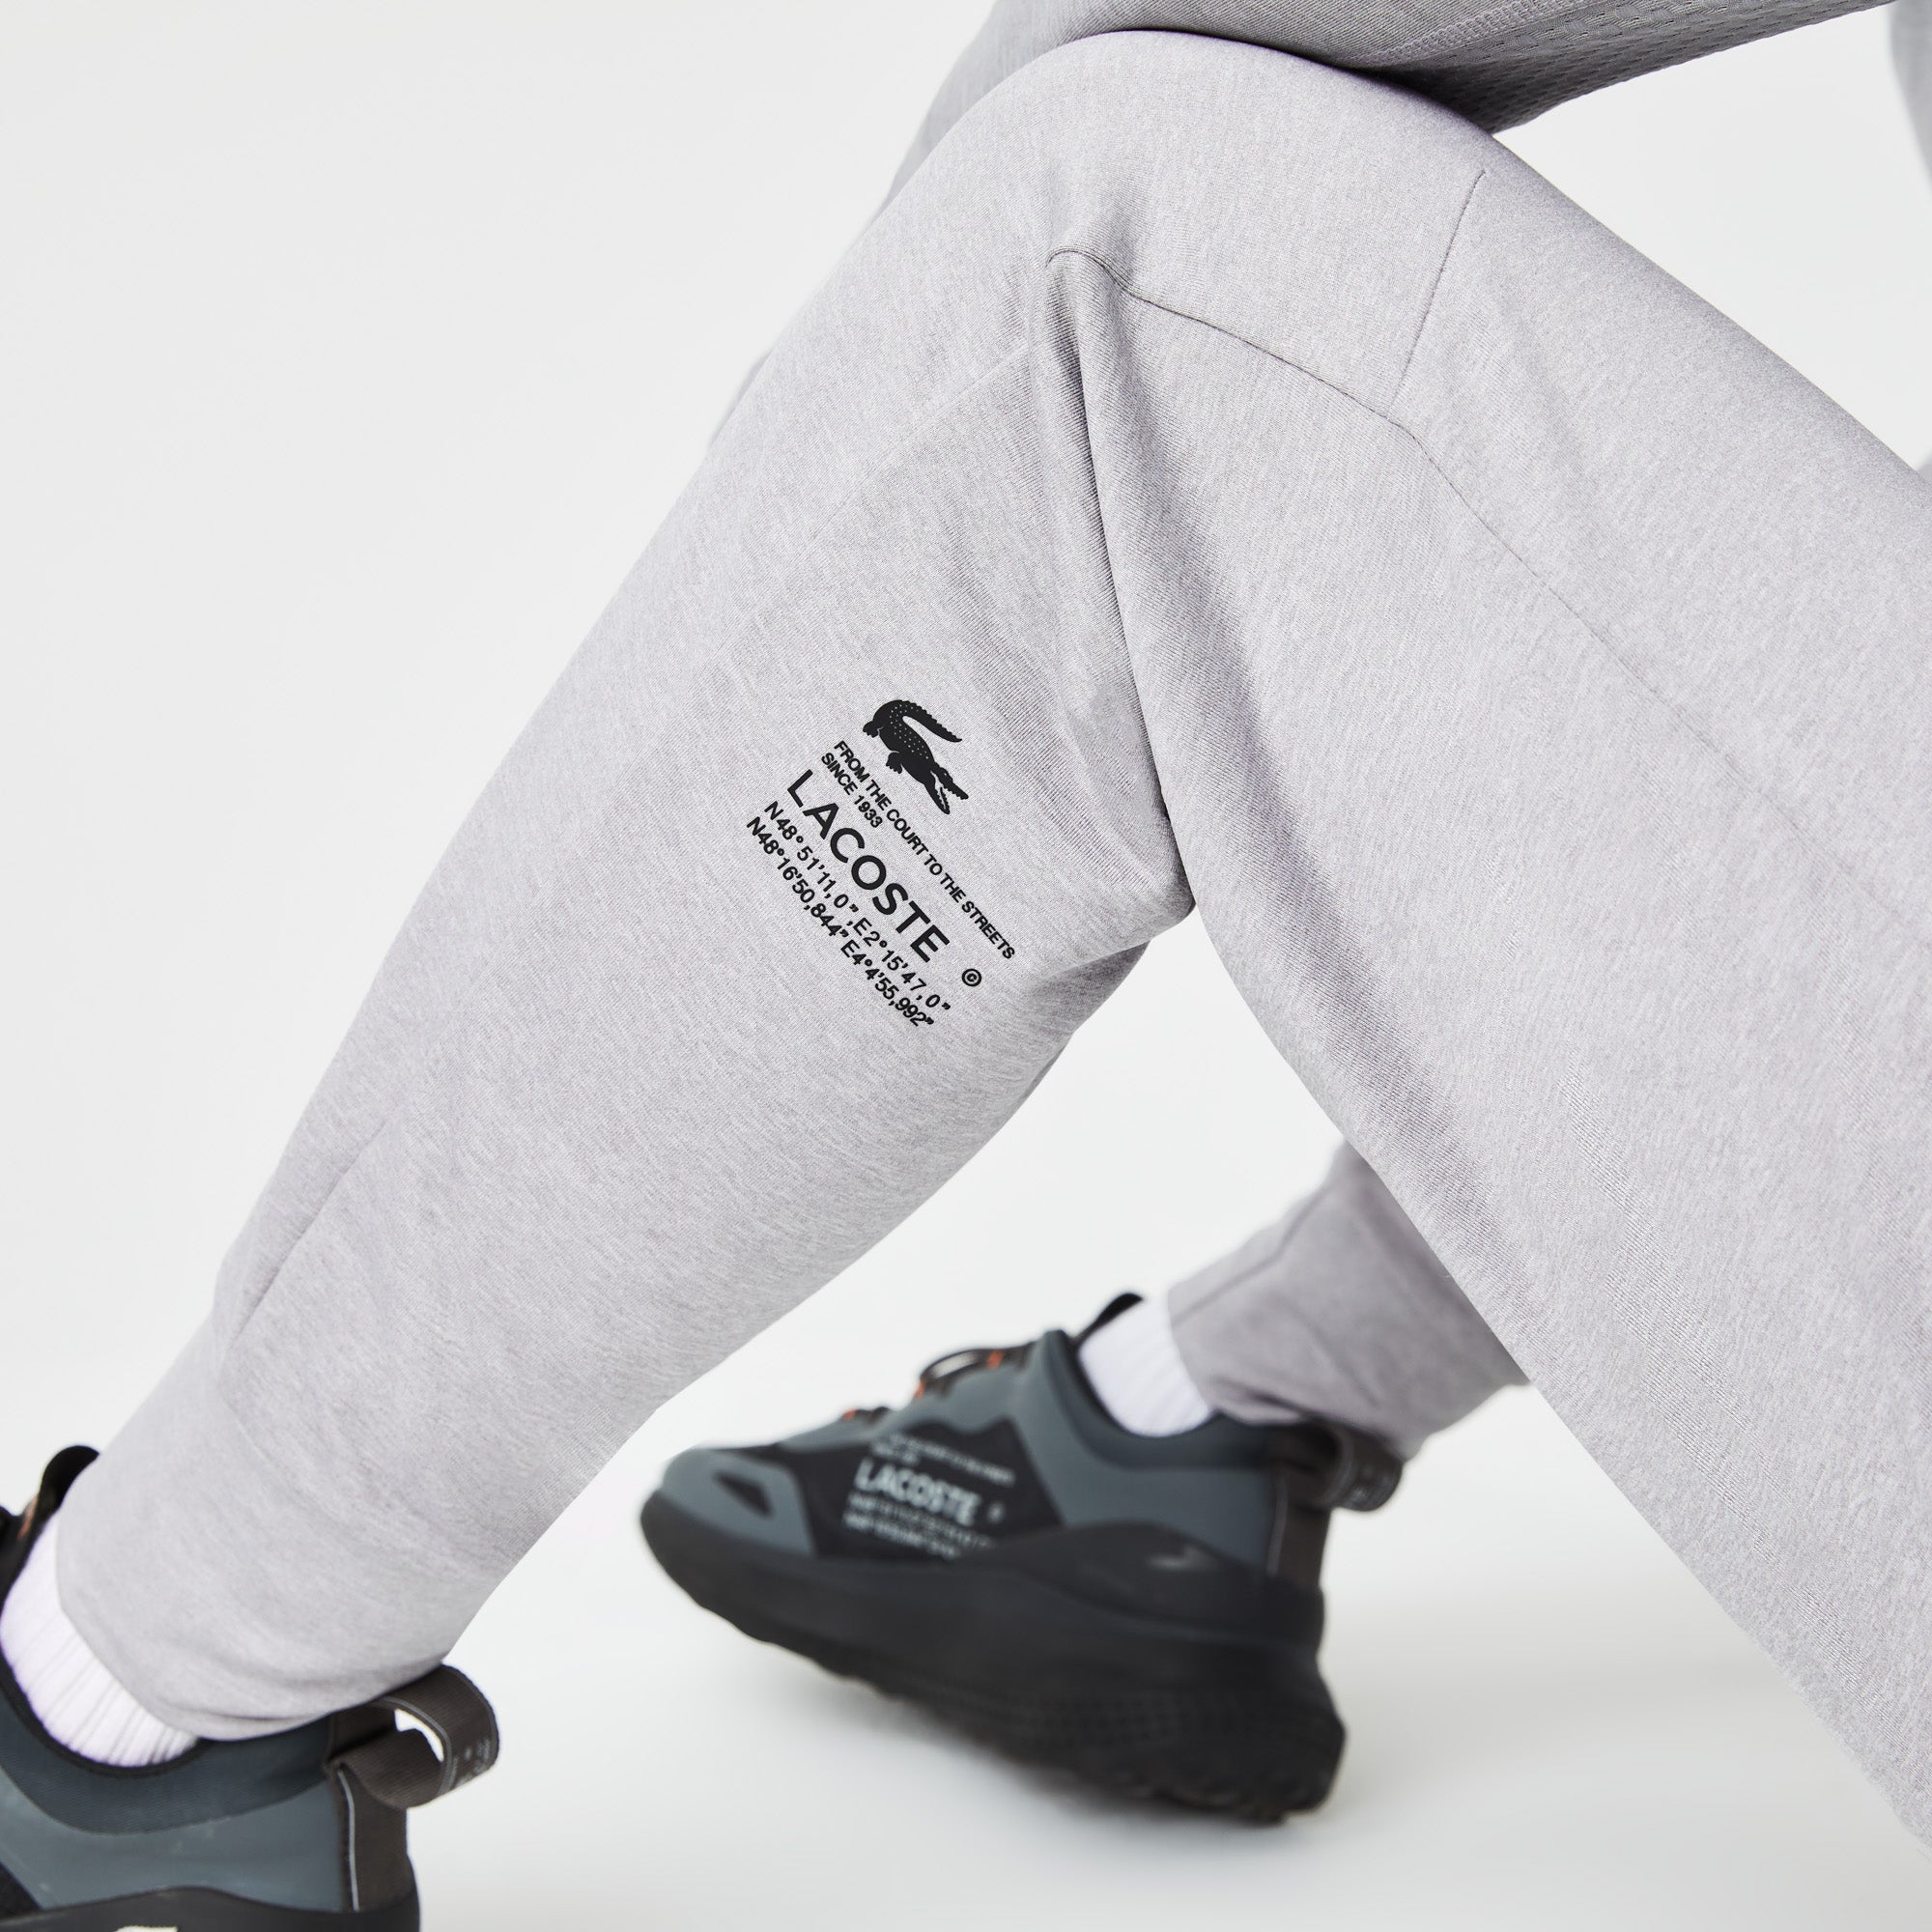 Lacoste Track Pants - Sport Two Ply